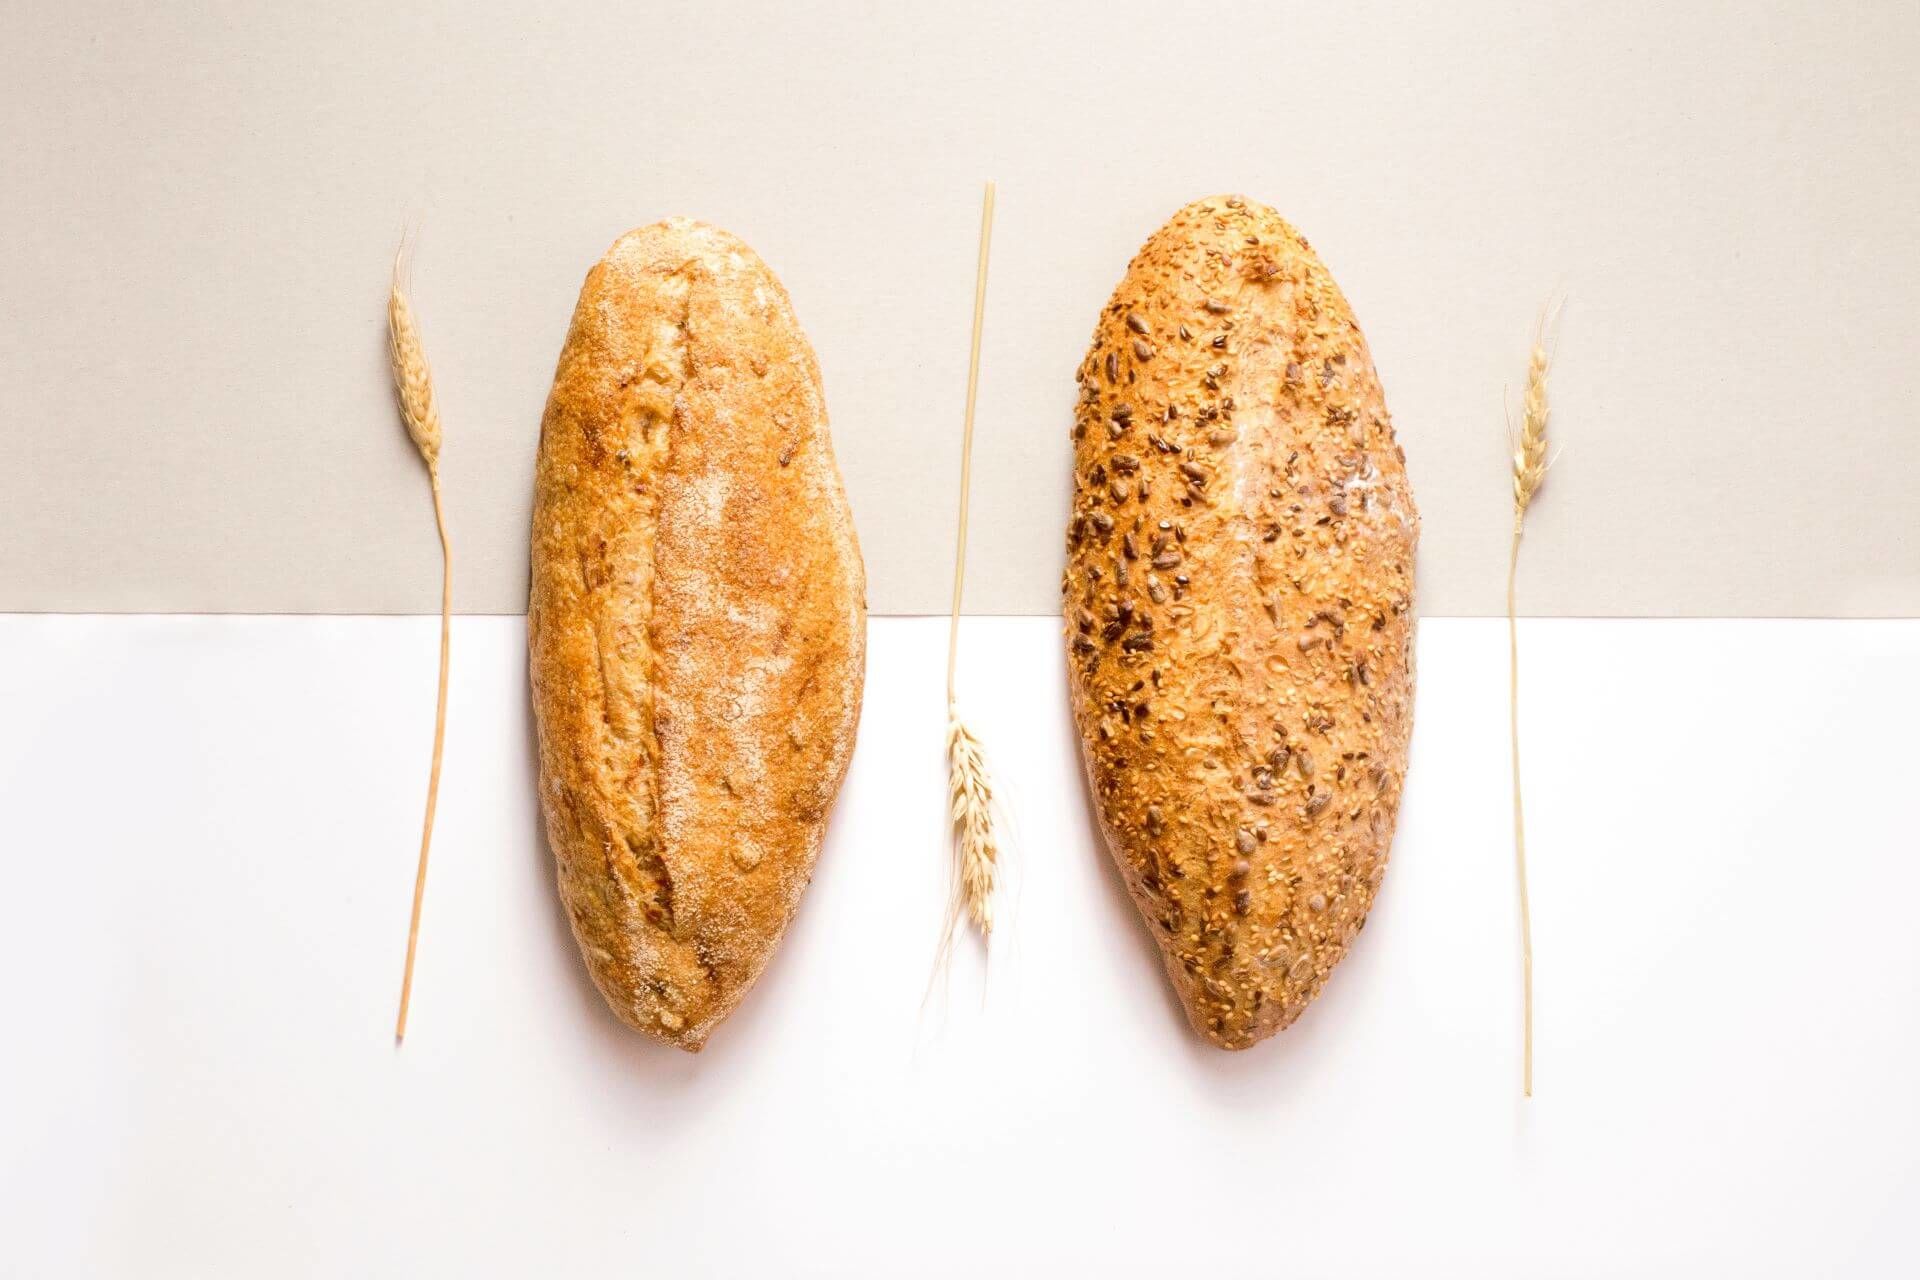 Should You Eat Gluten-Free? [ Dietitian-Approved ] Updated August 2020